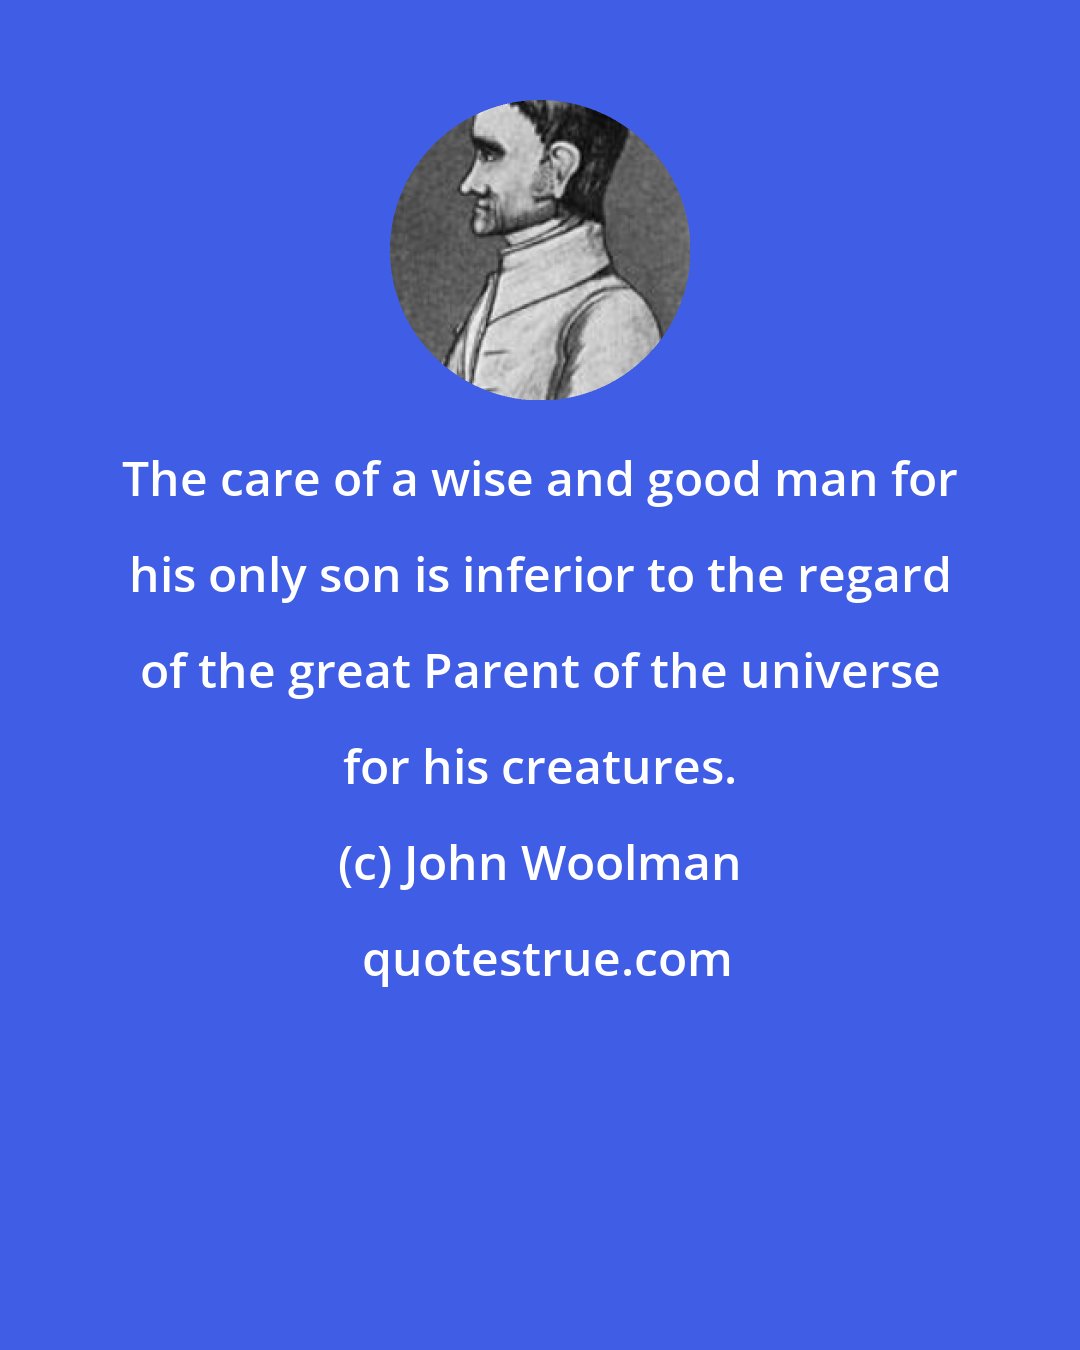 John Woolman: The care of a wise and good man for his only son is inferior to the regard of the great Parent of the universe for his creatures.